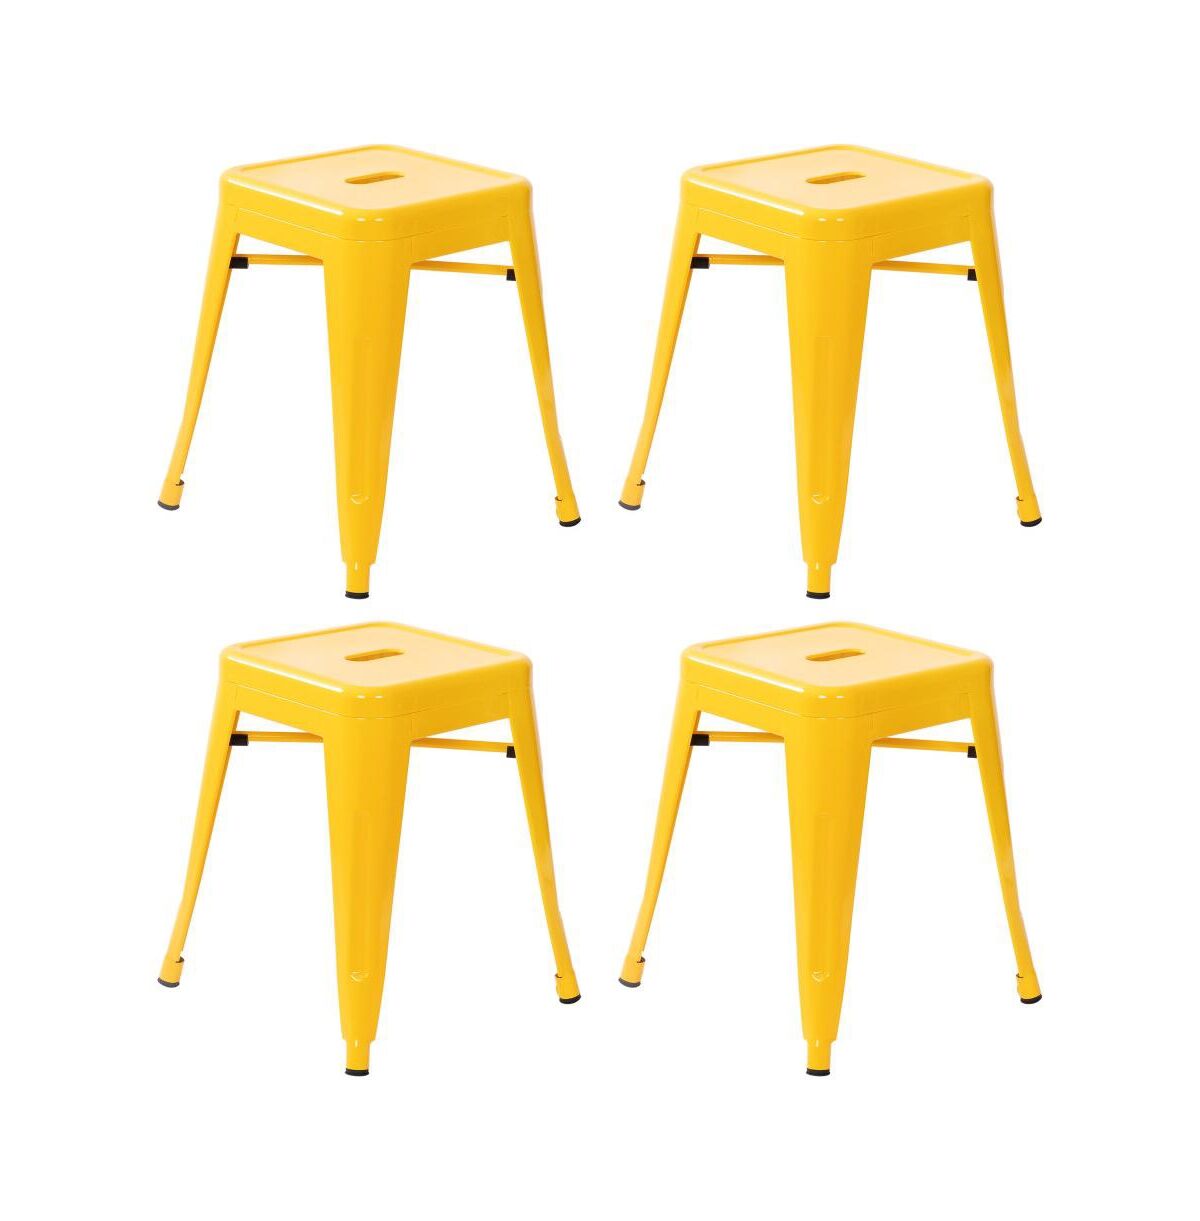 Emma+oliver 18 Inch Table Height Indoor Stackable Metal Dining Stool-Set Of 4 - Yellow